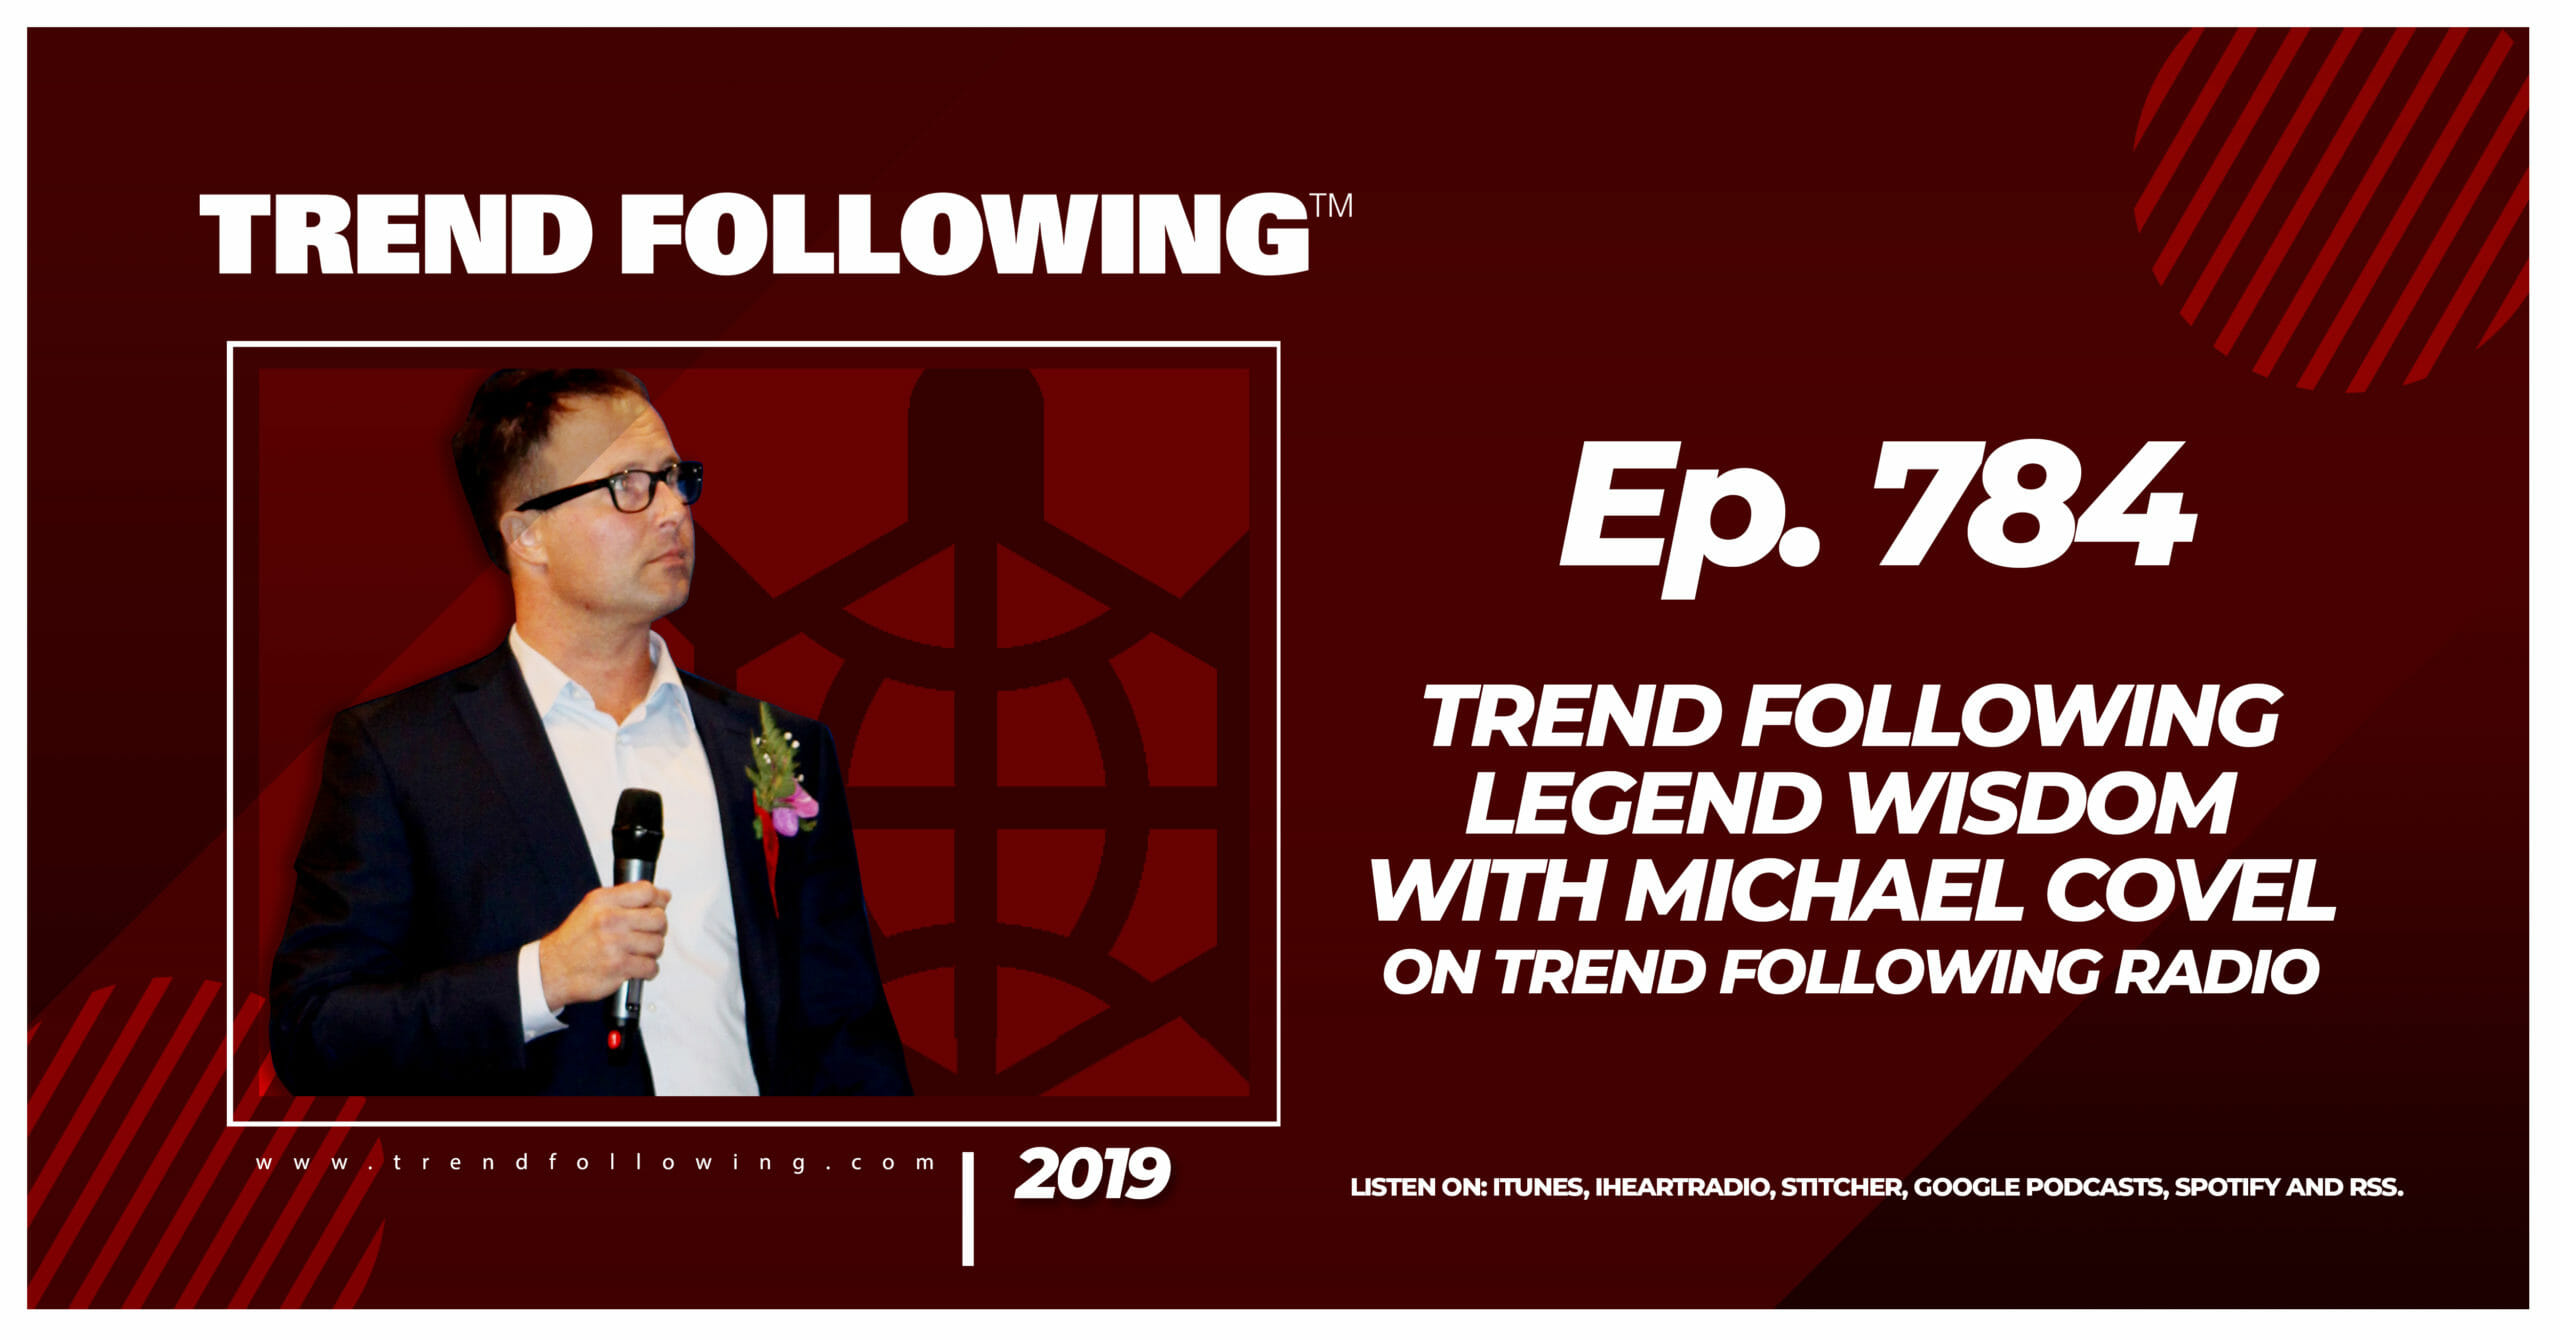 Trend Following Legend Wisdom with Michael Covel